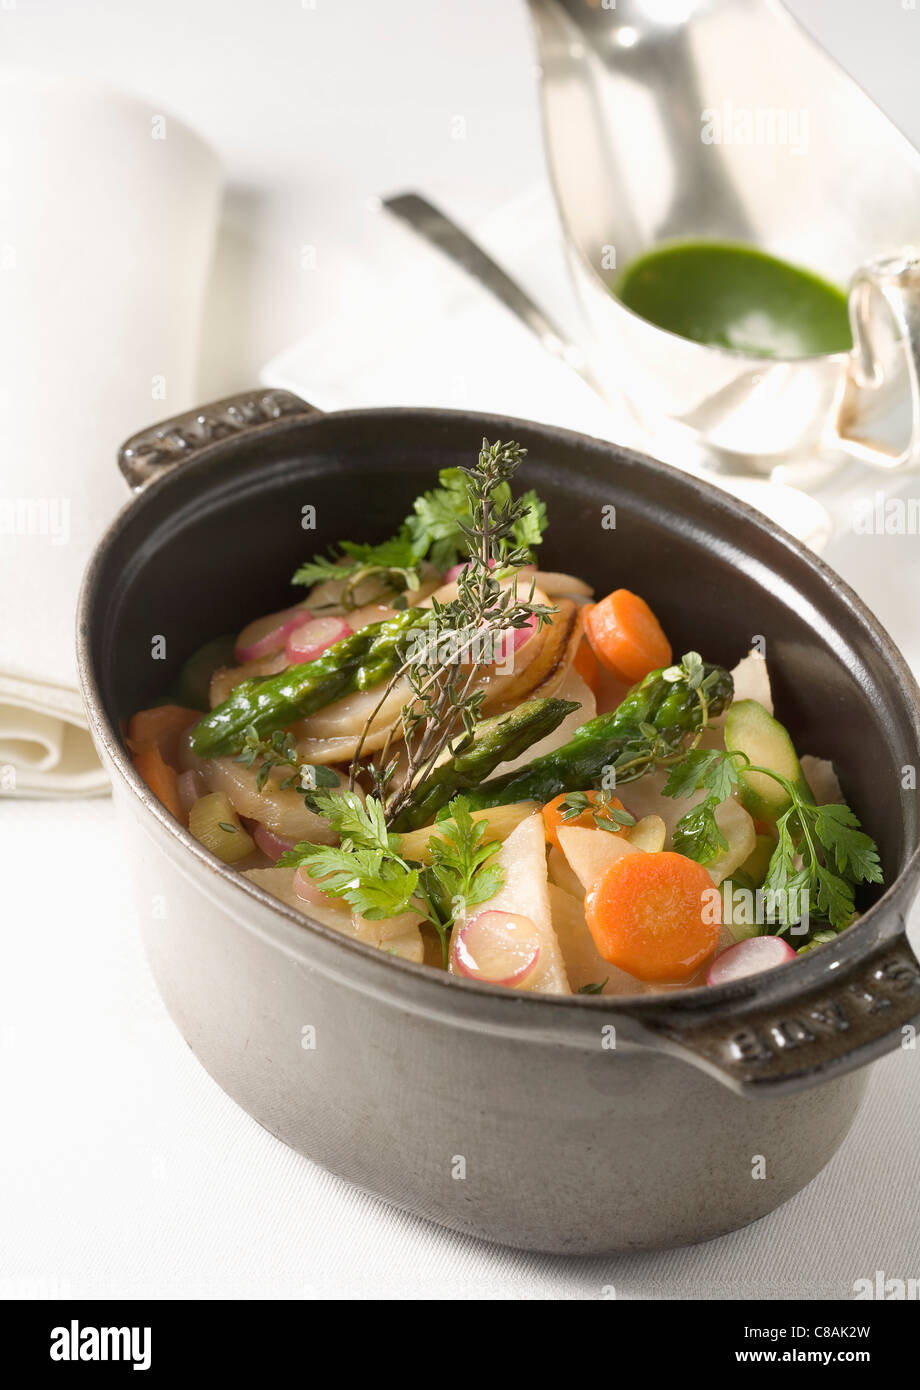 Casserole dish of vegetables with herbs Stock Photo